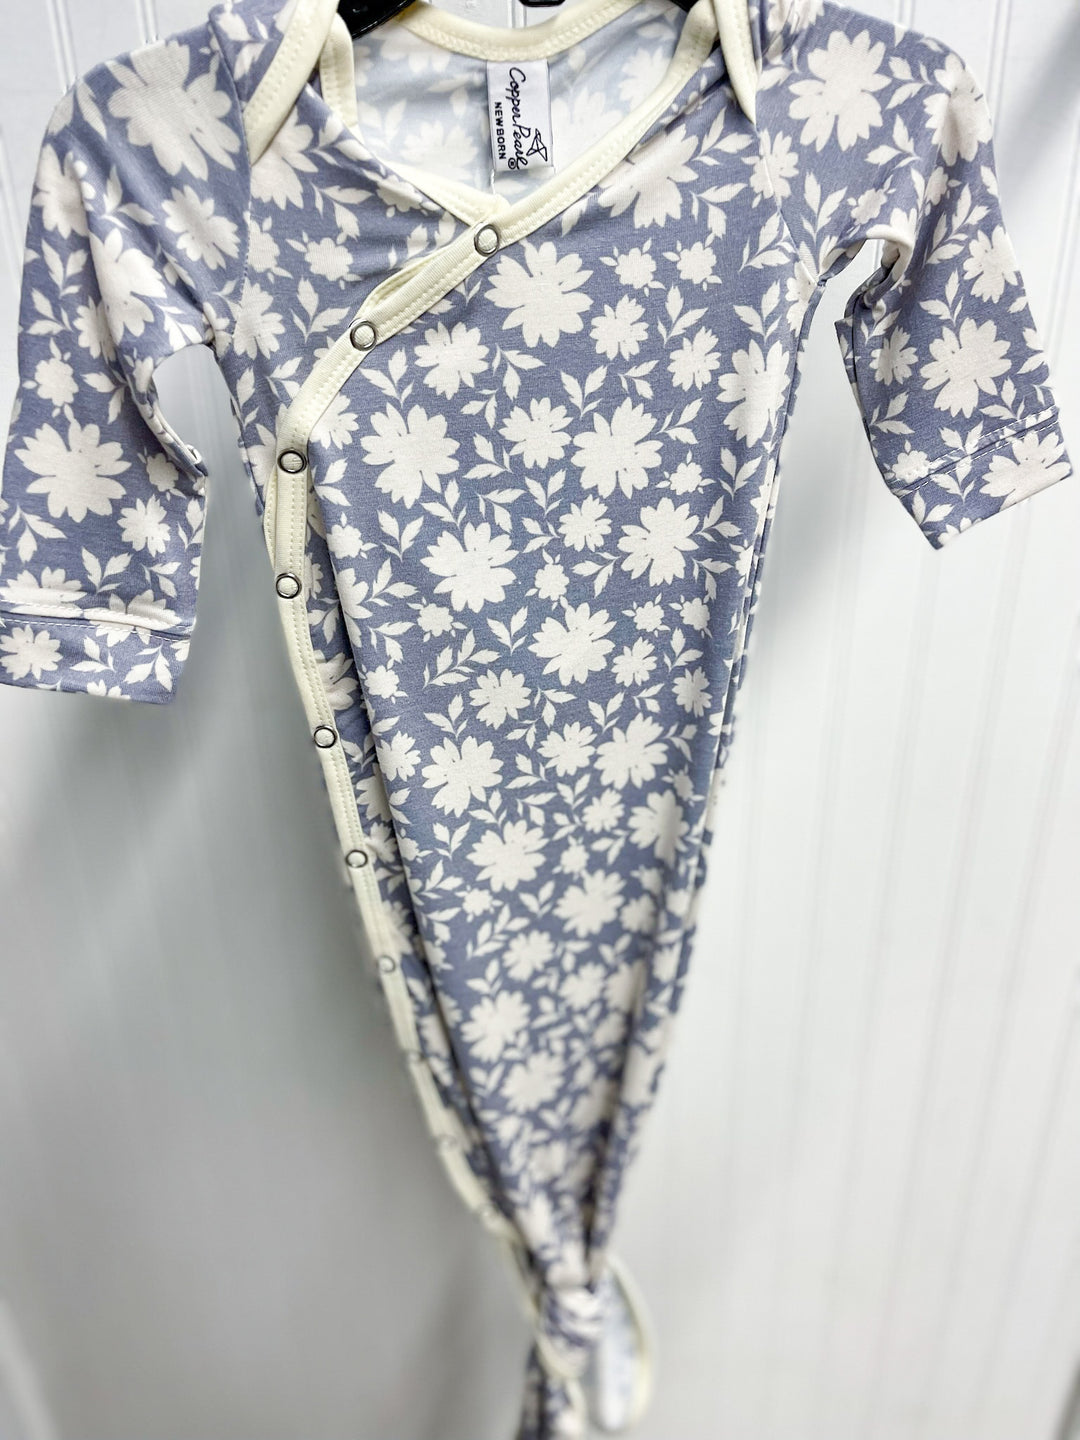 copper pearl knotted baby gown, Lacie print, lilac background with cream flowers, cream trim, snap button, knotted at the bottom so it can grow with baby.